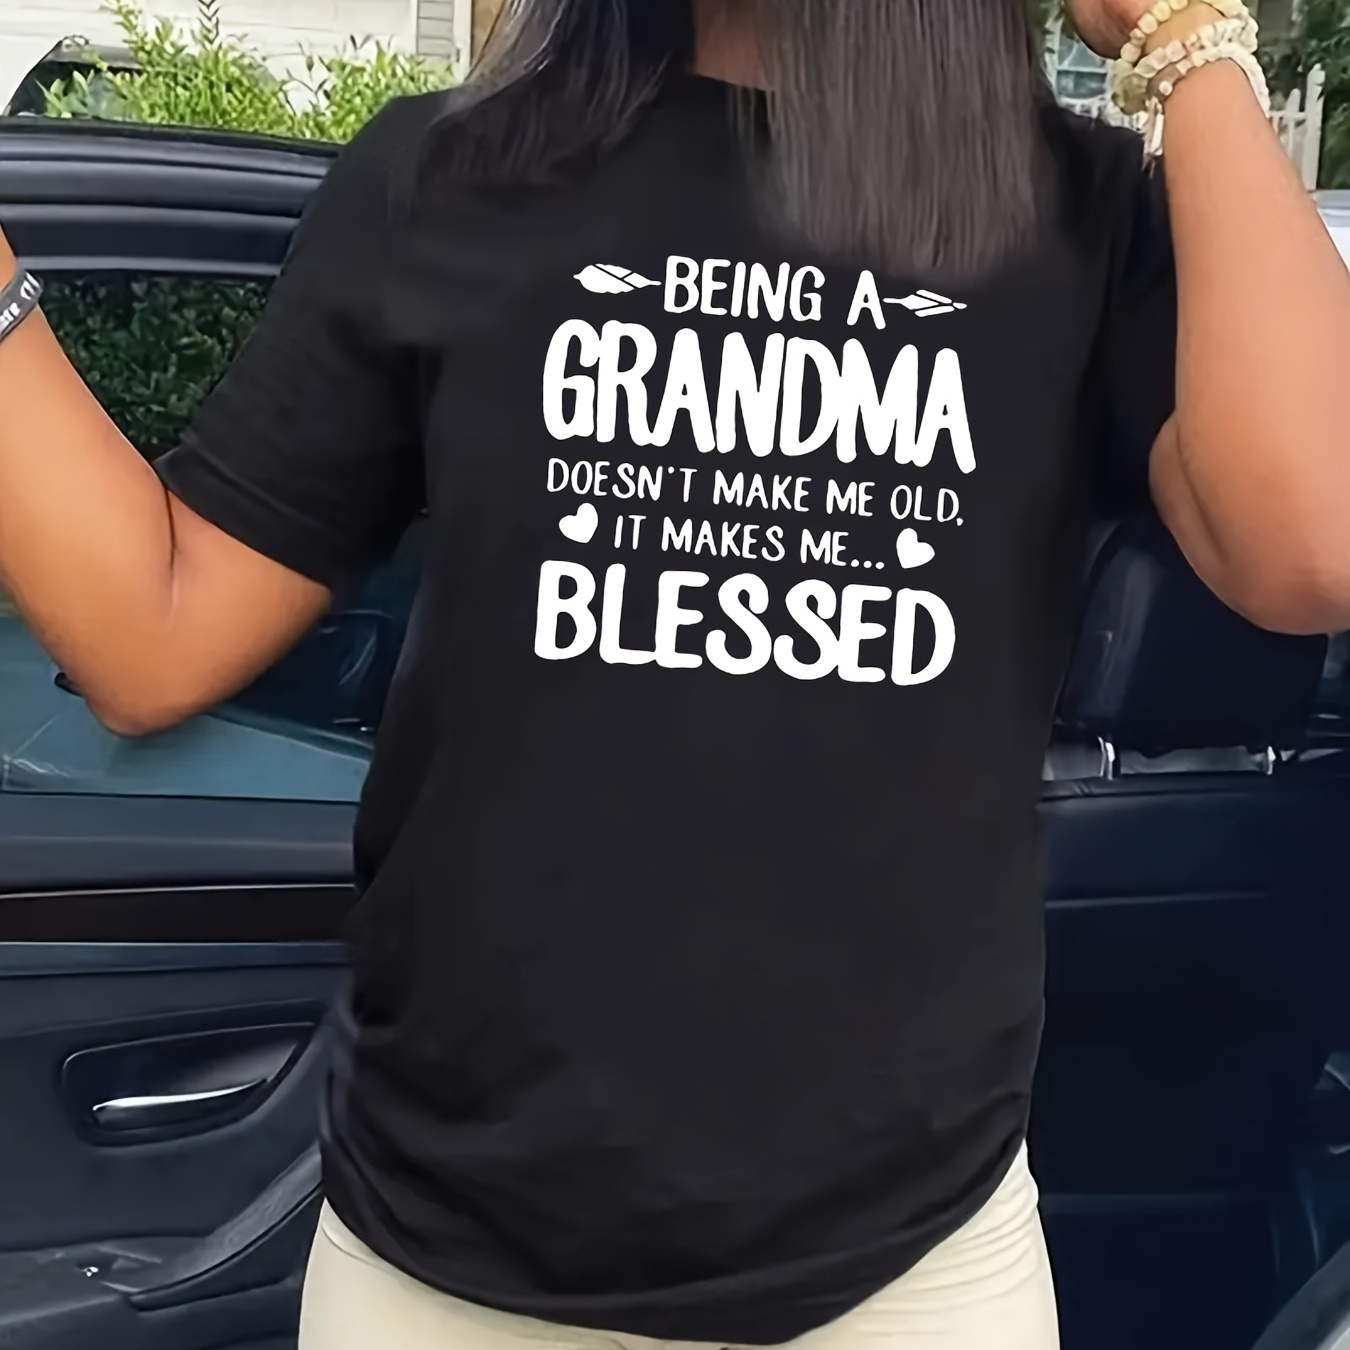 

being A Grandma" Print Crew Neck T-shirt, Solid Short Sleeve Fashion Loose Tee, Women's Tops